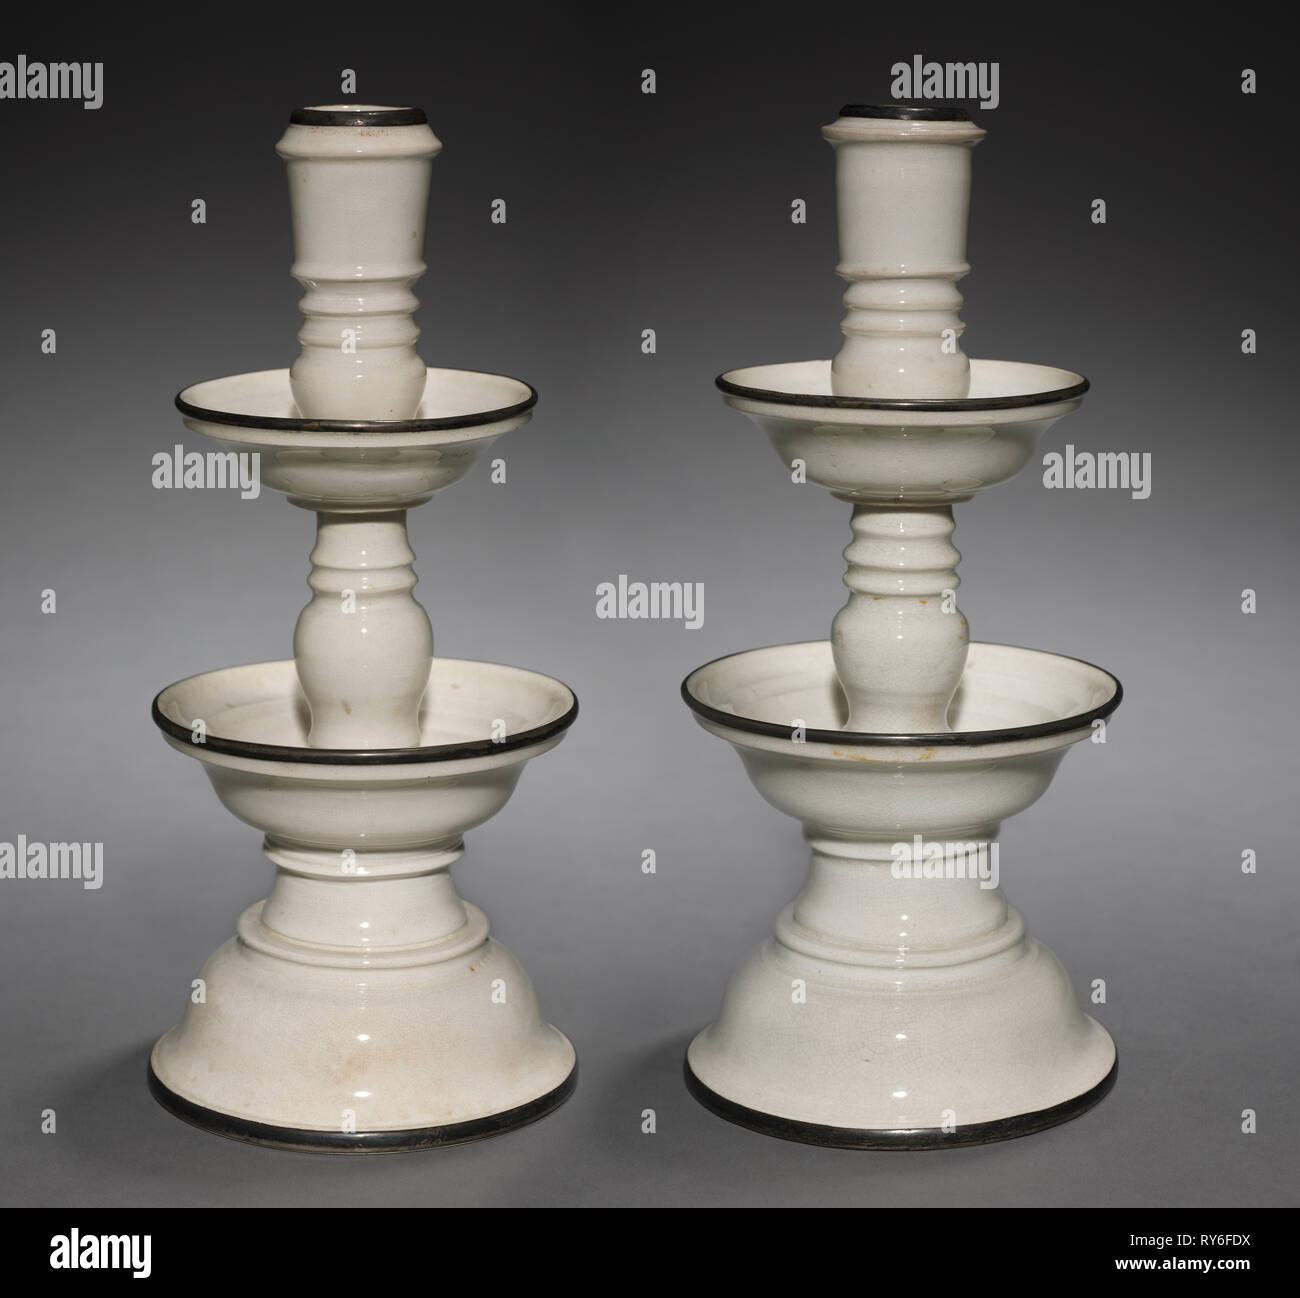 Candlesticks, 1600s. China, Ming dynasty (1368-1644). Glazed porcelain with metal rims; overall: 32.4 cm (12 3/4 in Stock Photo